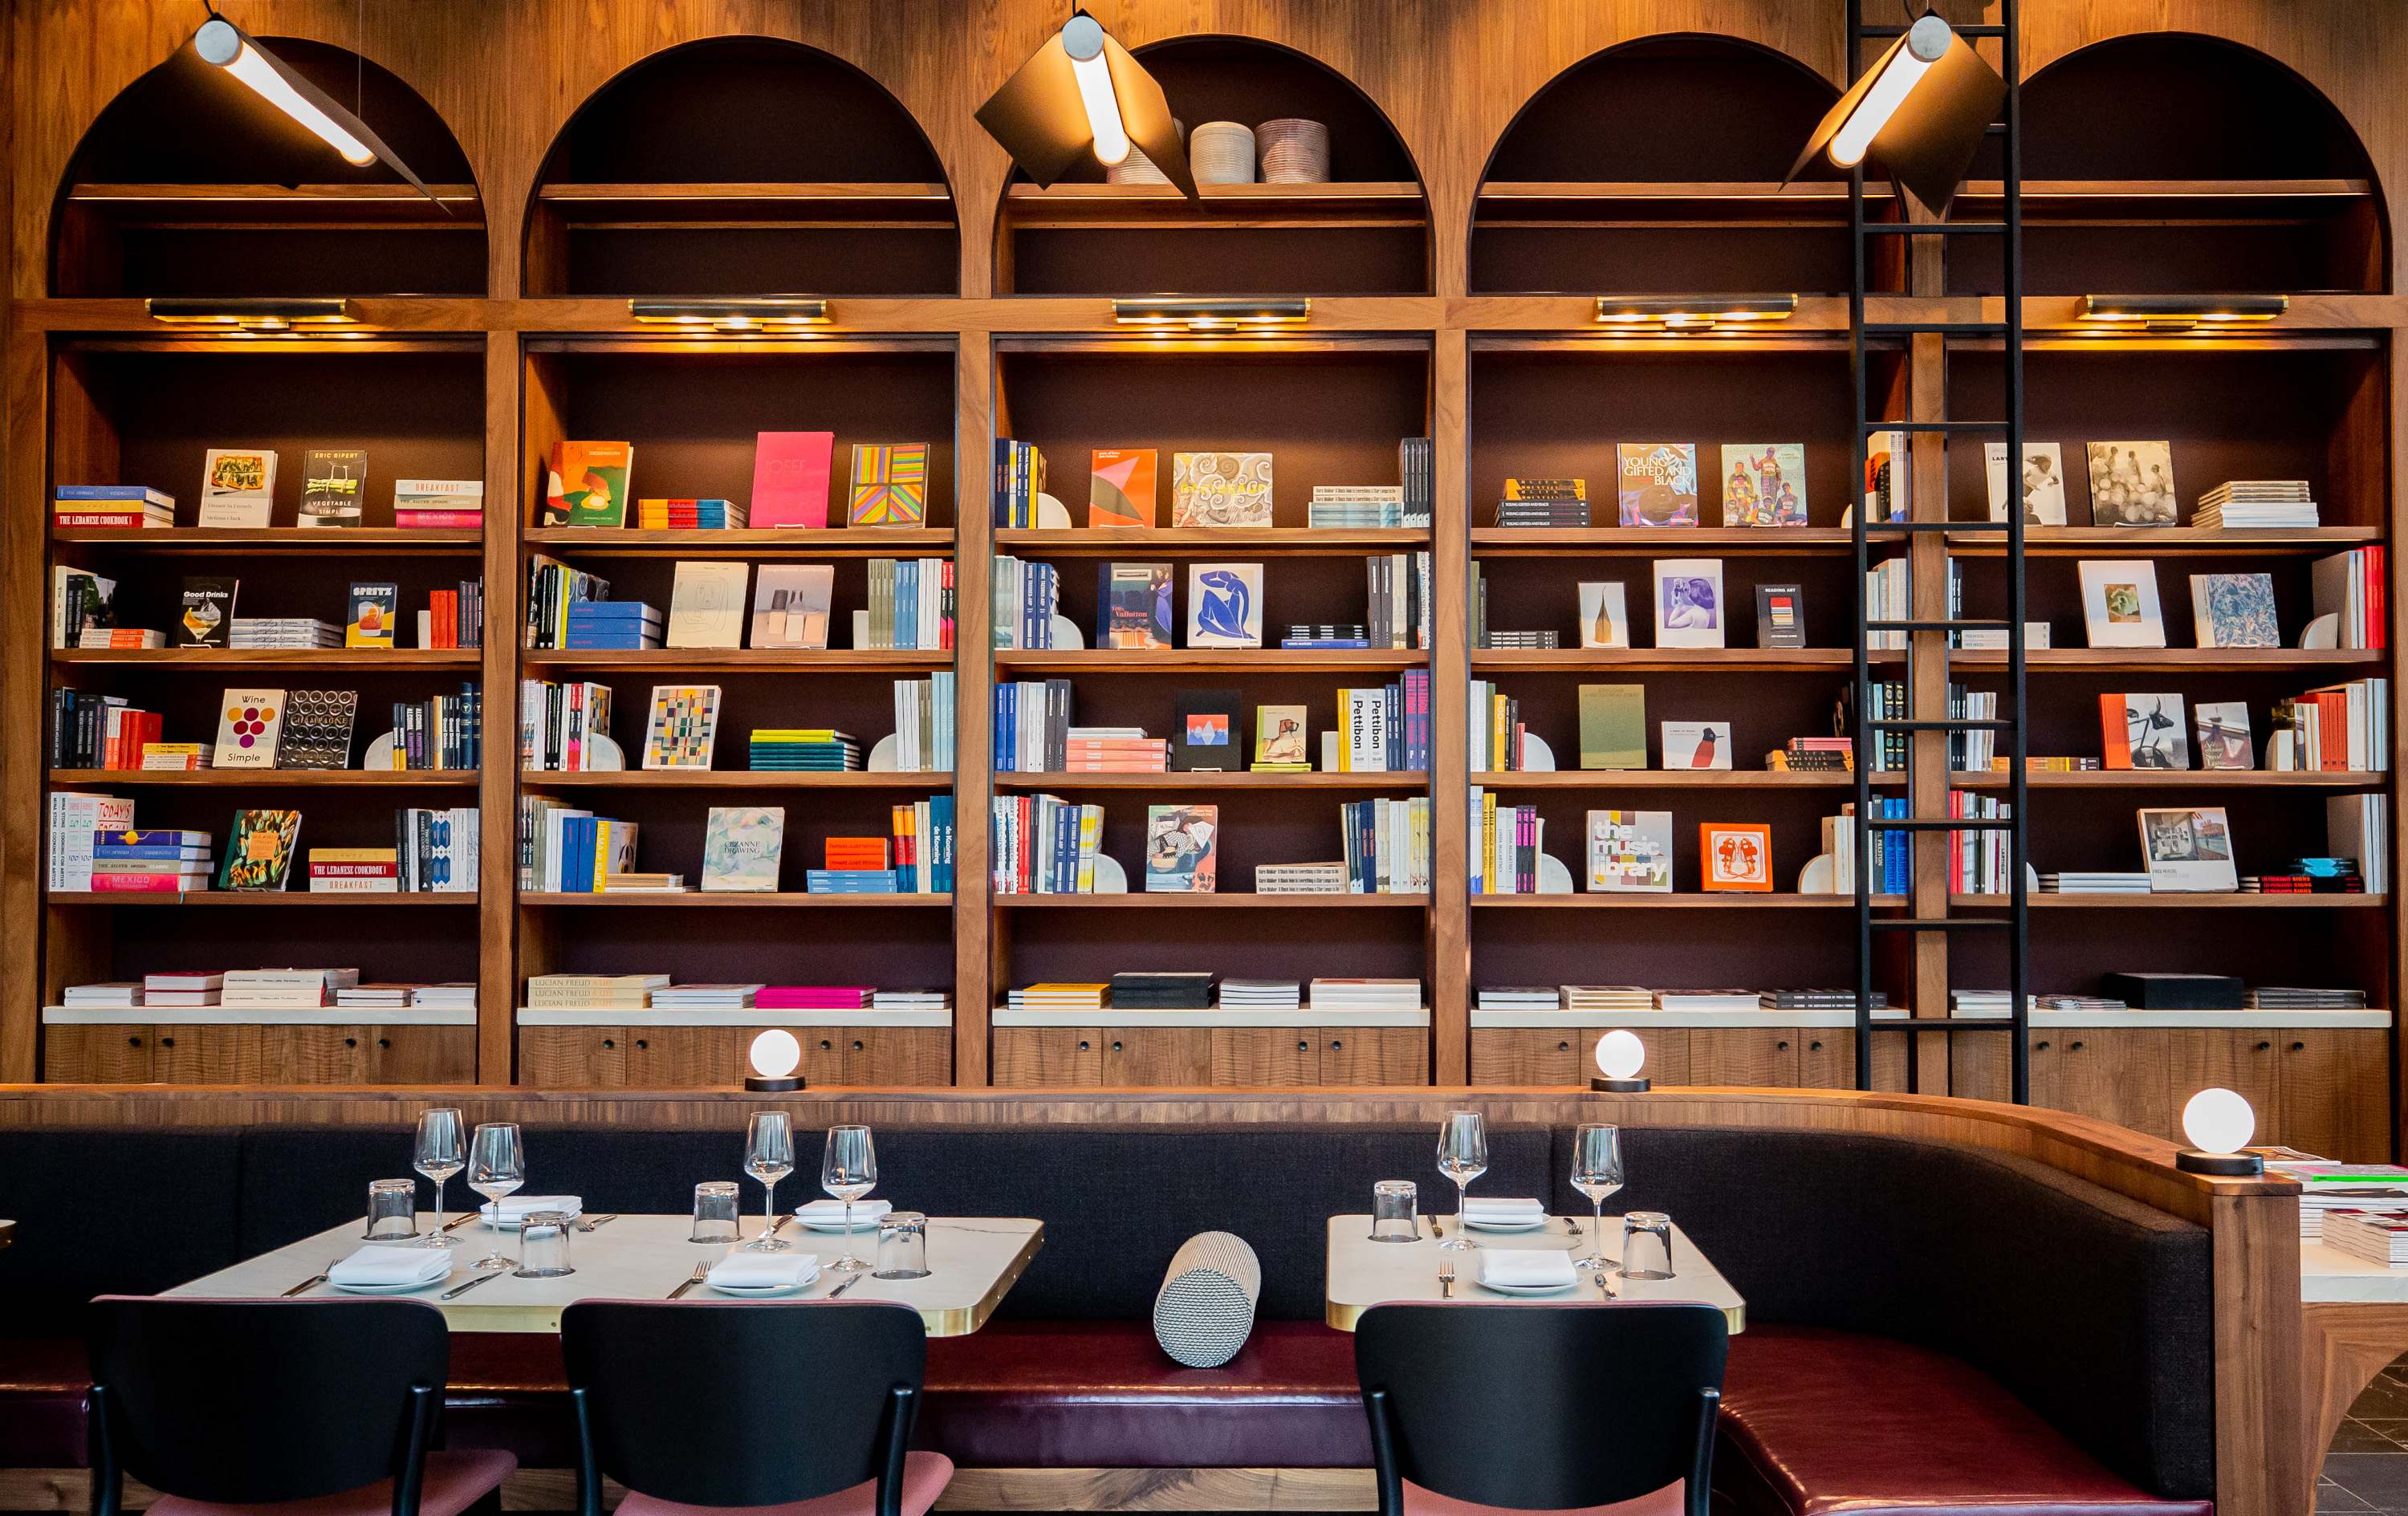 Lucian Books and Wine is a wine bar and book shop combo in Buckhead serving French-American fare.